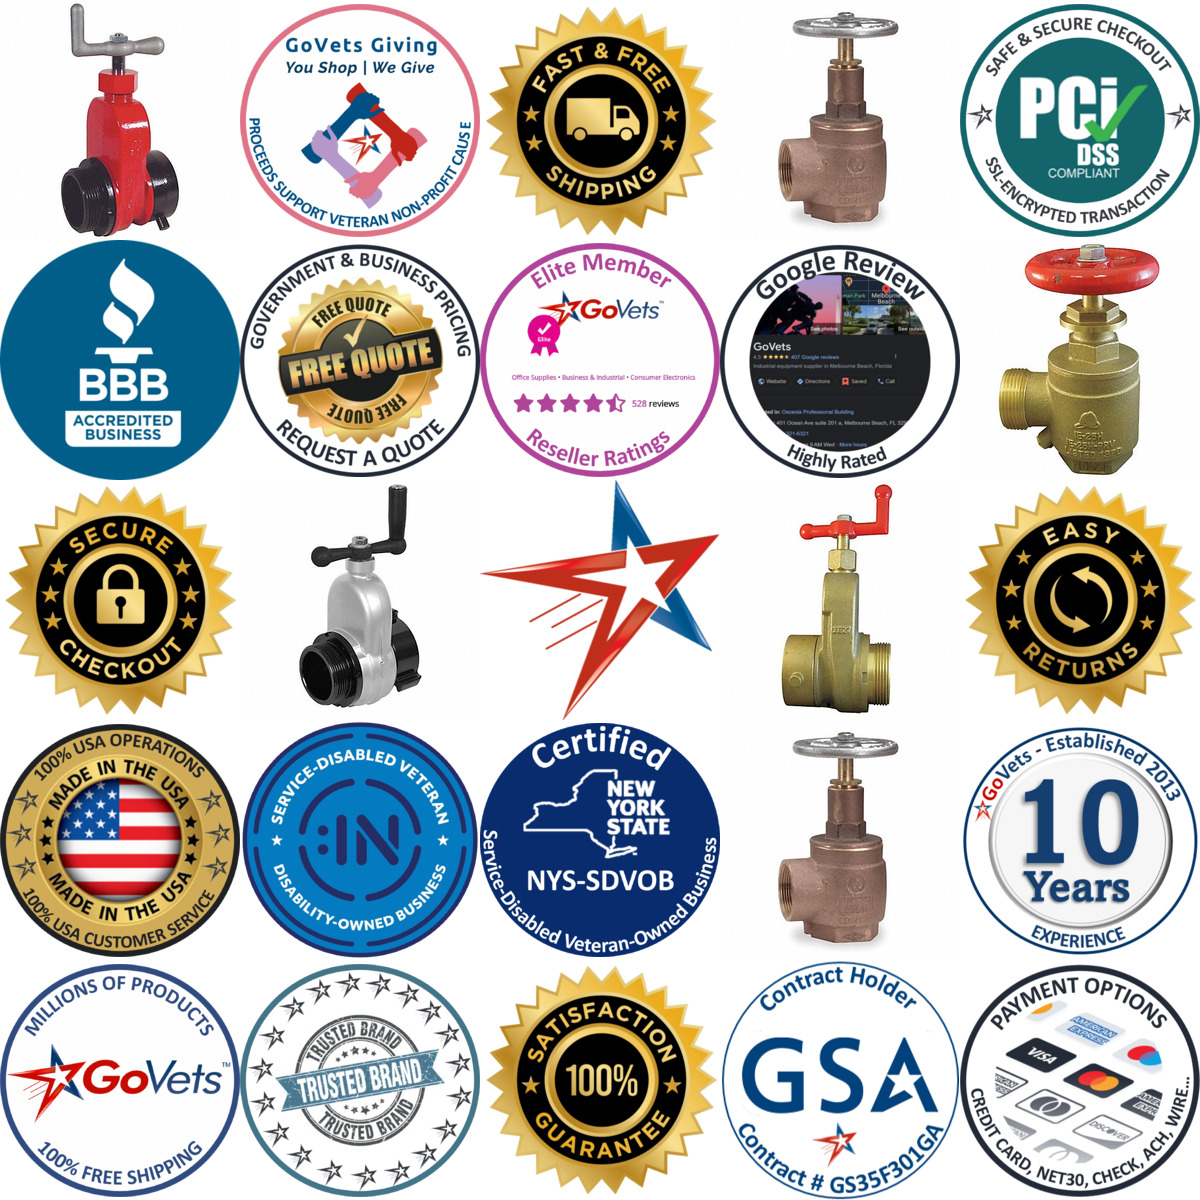 A selection of Hydrant and Hose Rack Gate Valves products on GoVets